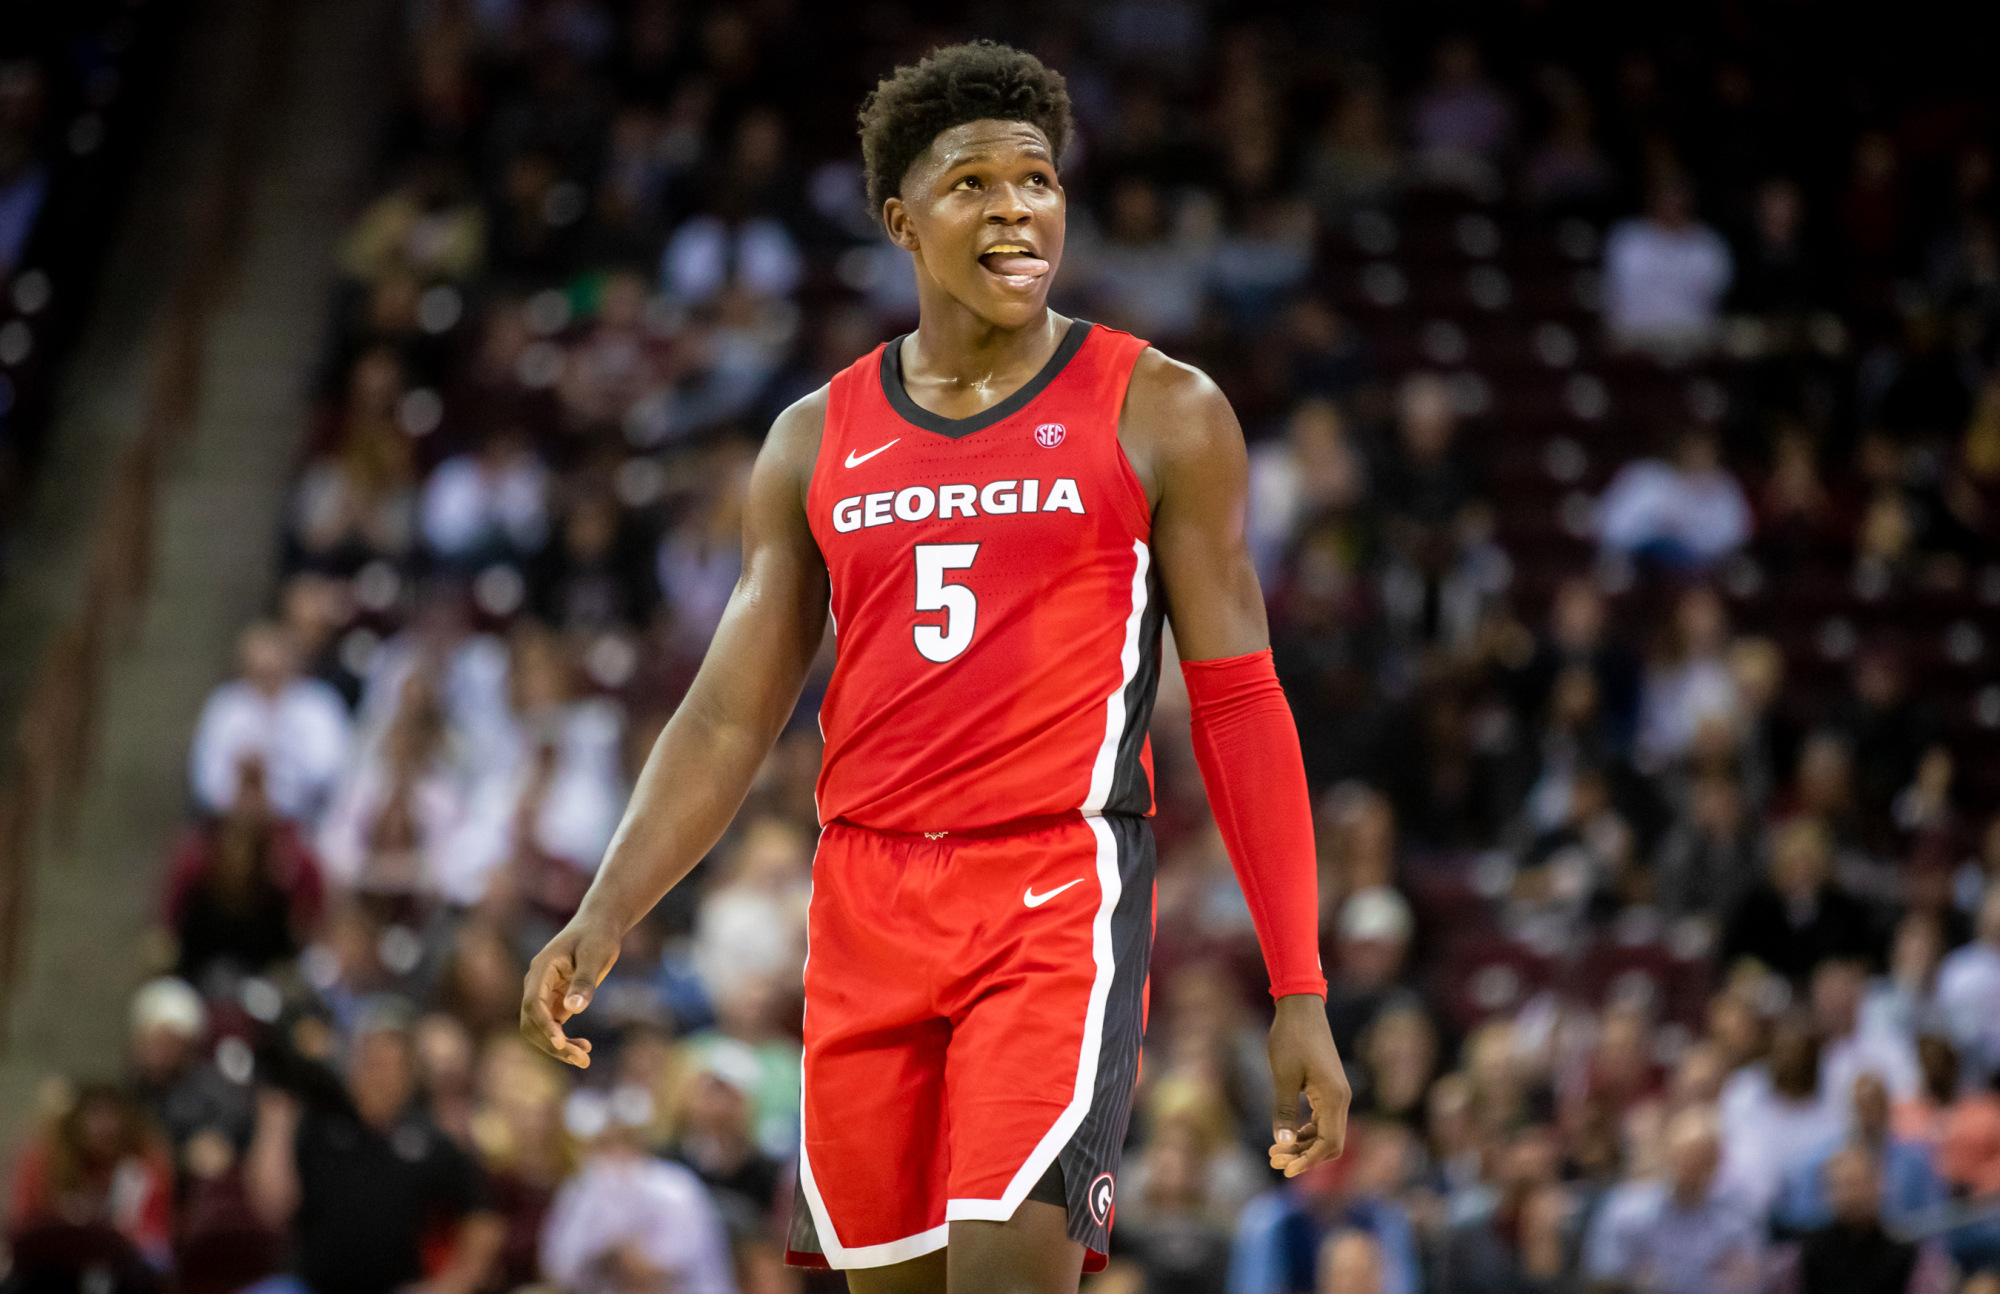 Feb 26, 2020; Columbia, South Carolina, USA; Georgia Bulldogs guard Anthony Edwards (5) reacts to a play against the South Carolina Gamecocks in the second half at Colonial Life Arena.